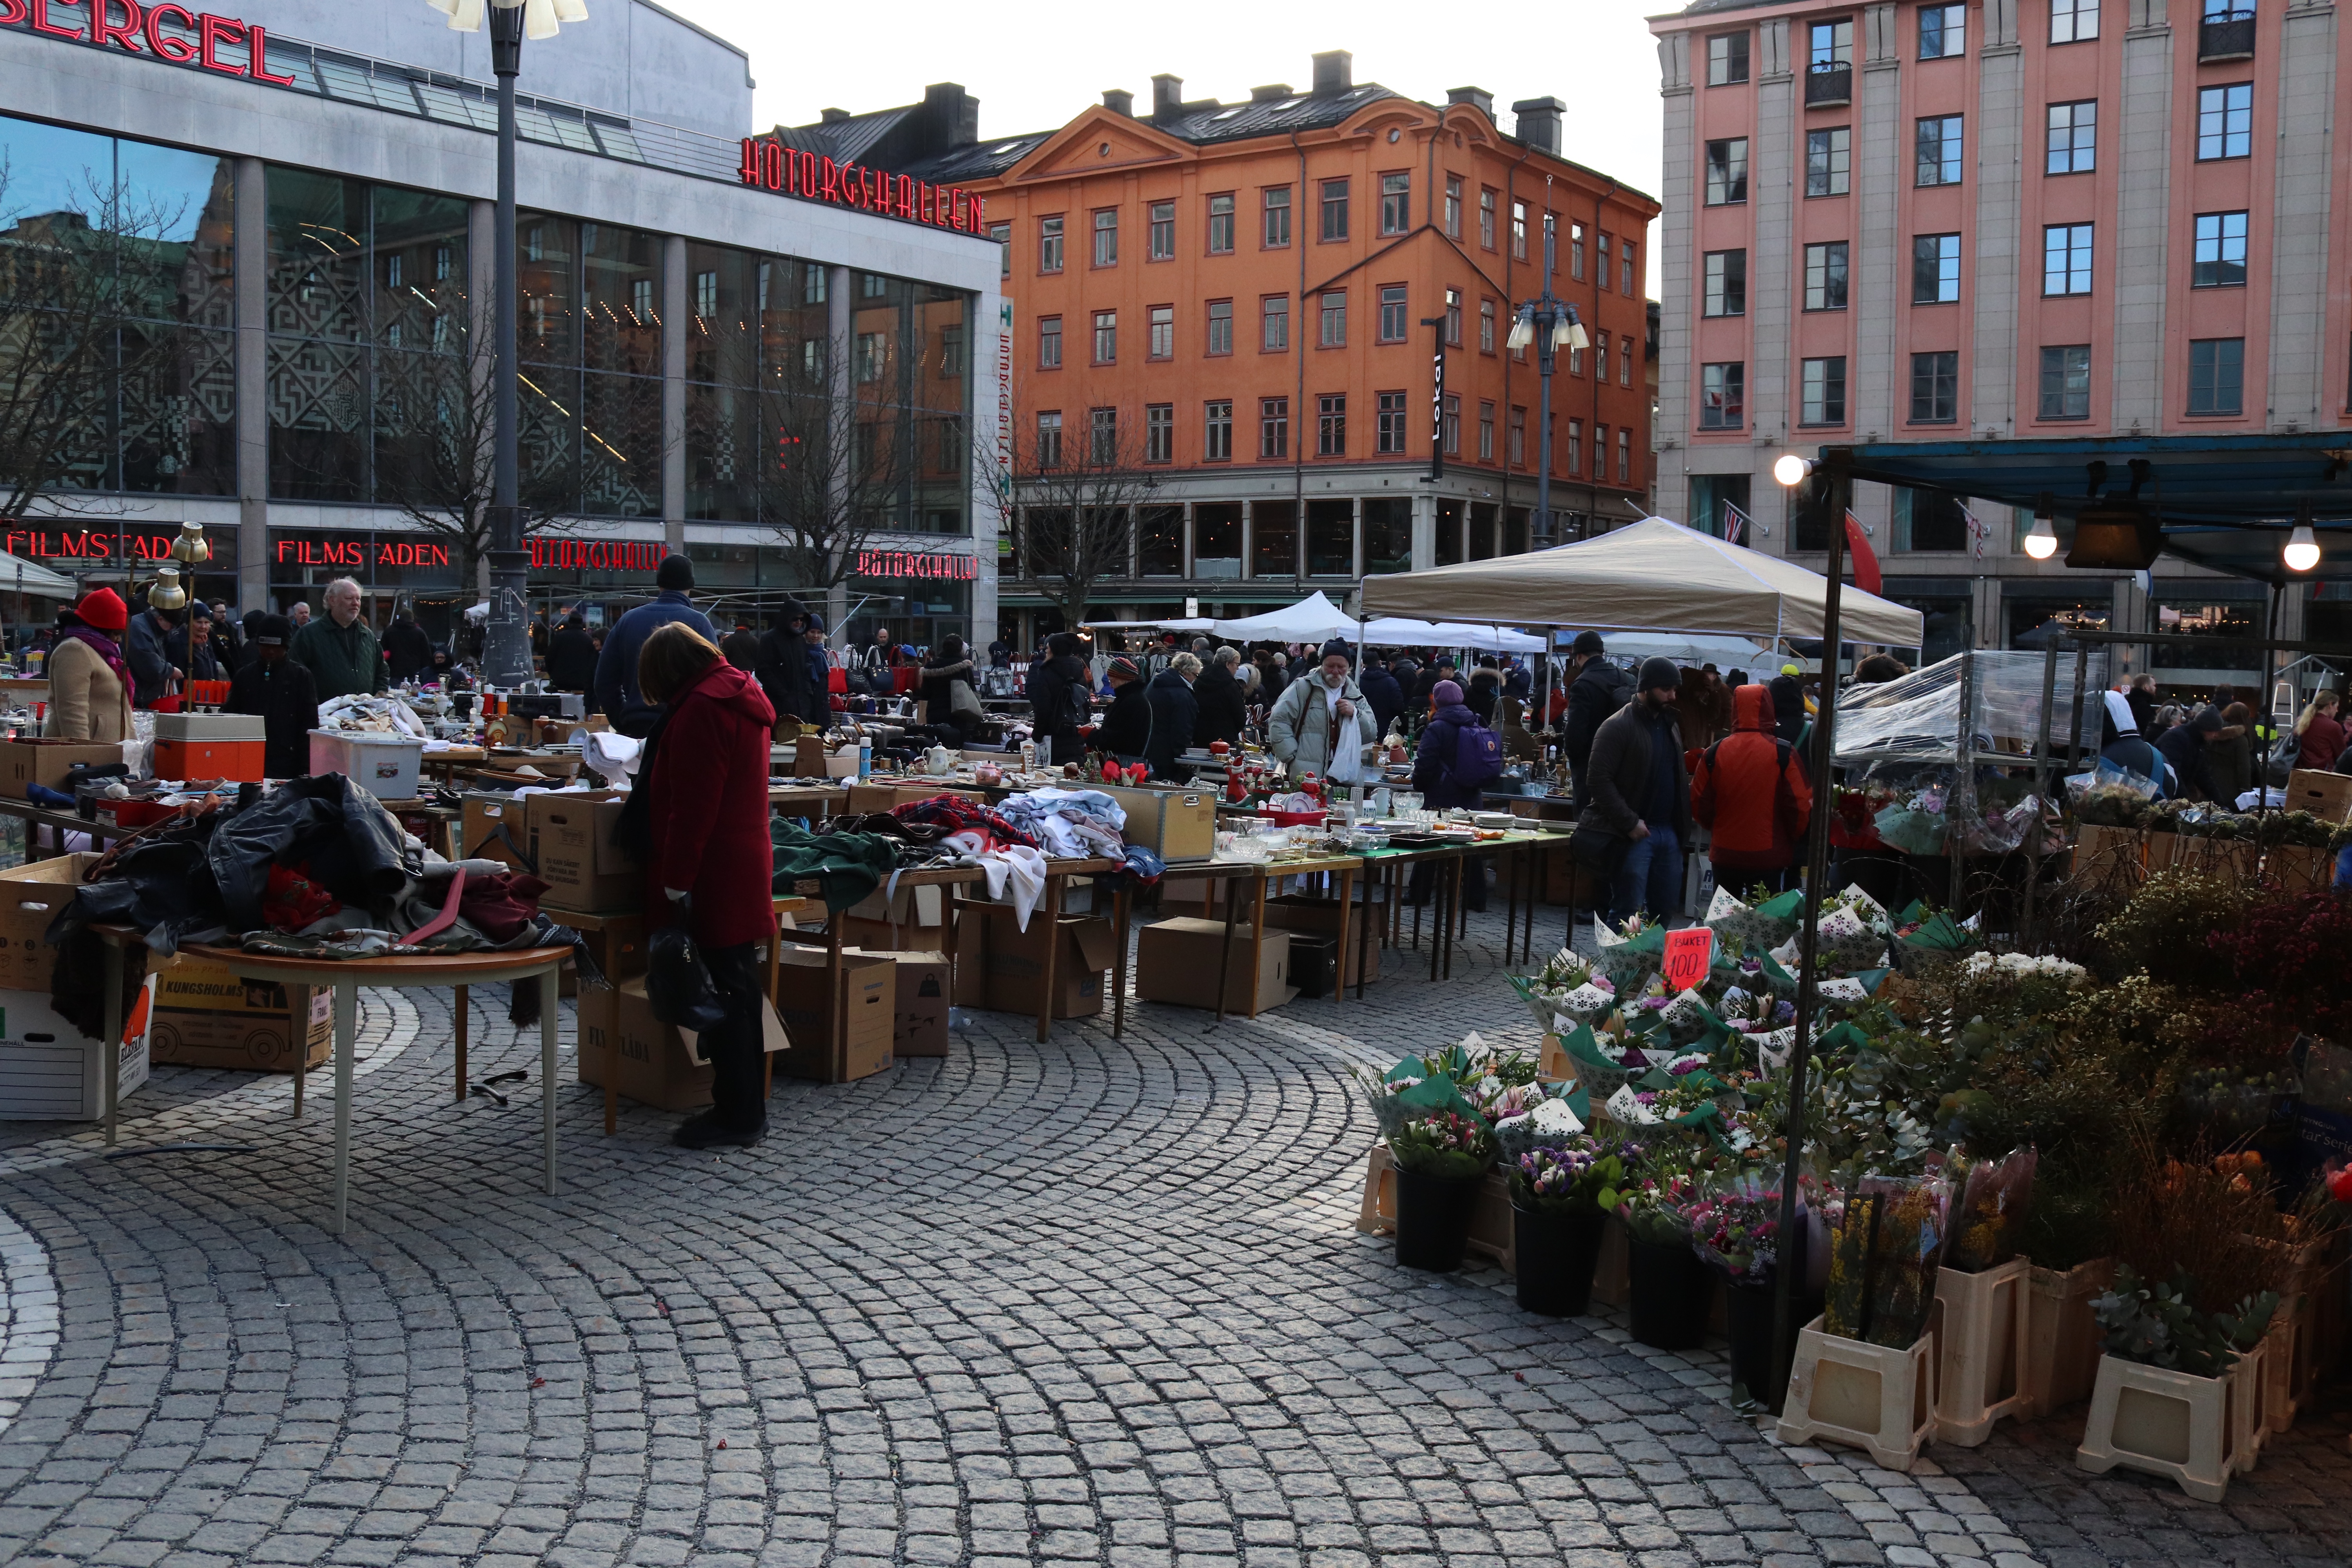 No 2 days in stockholm are complete without a trip to the Hotorget Flea Market